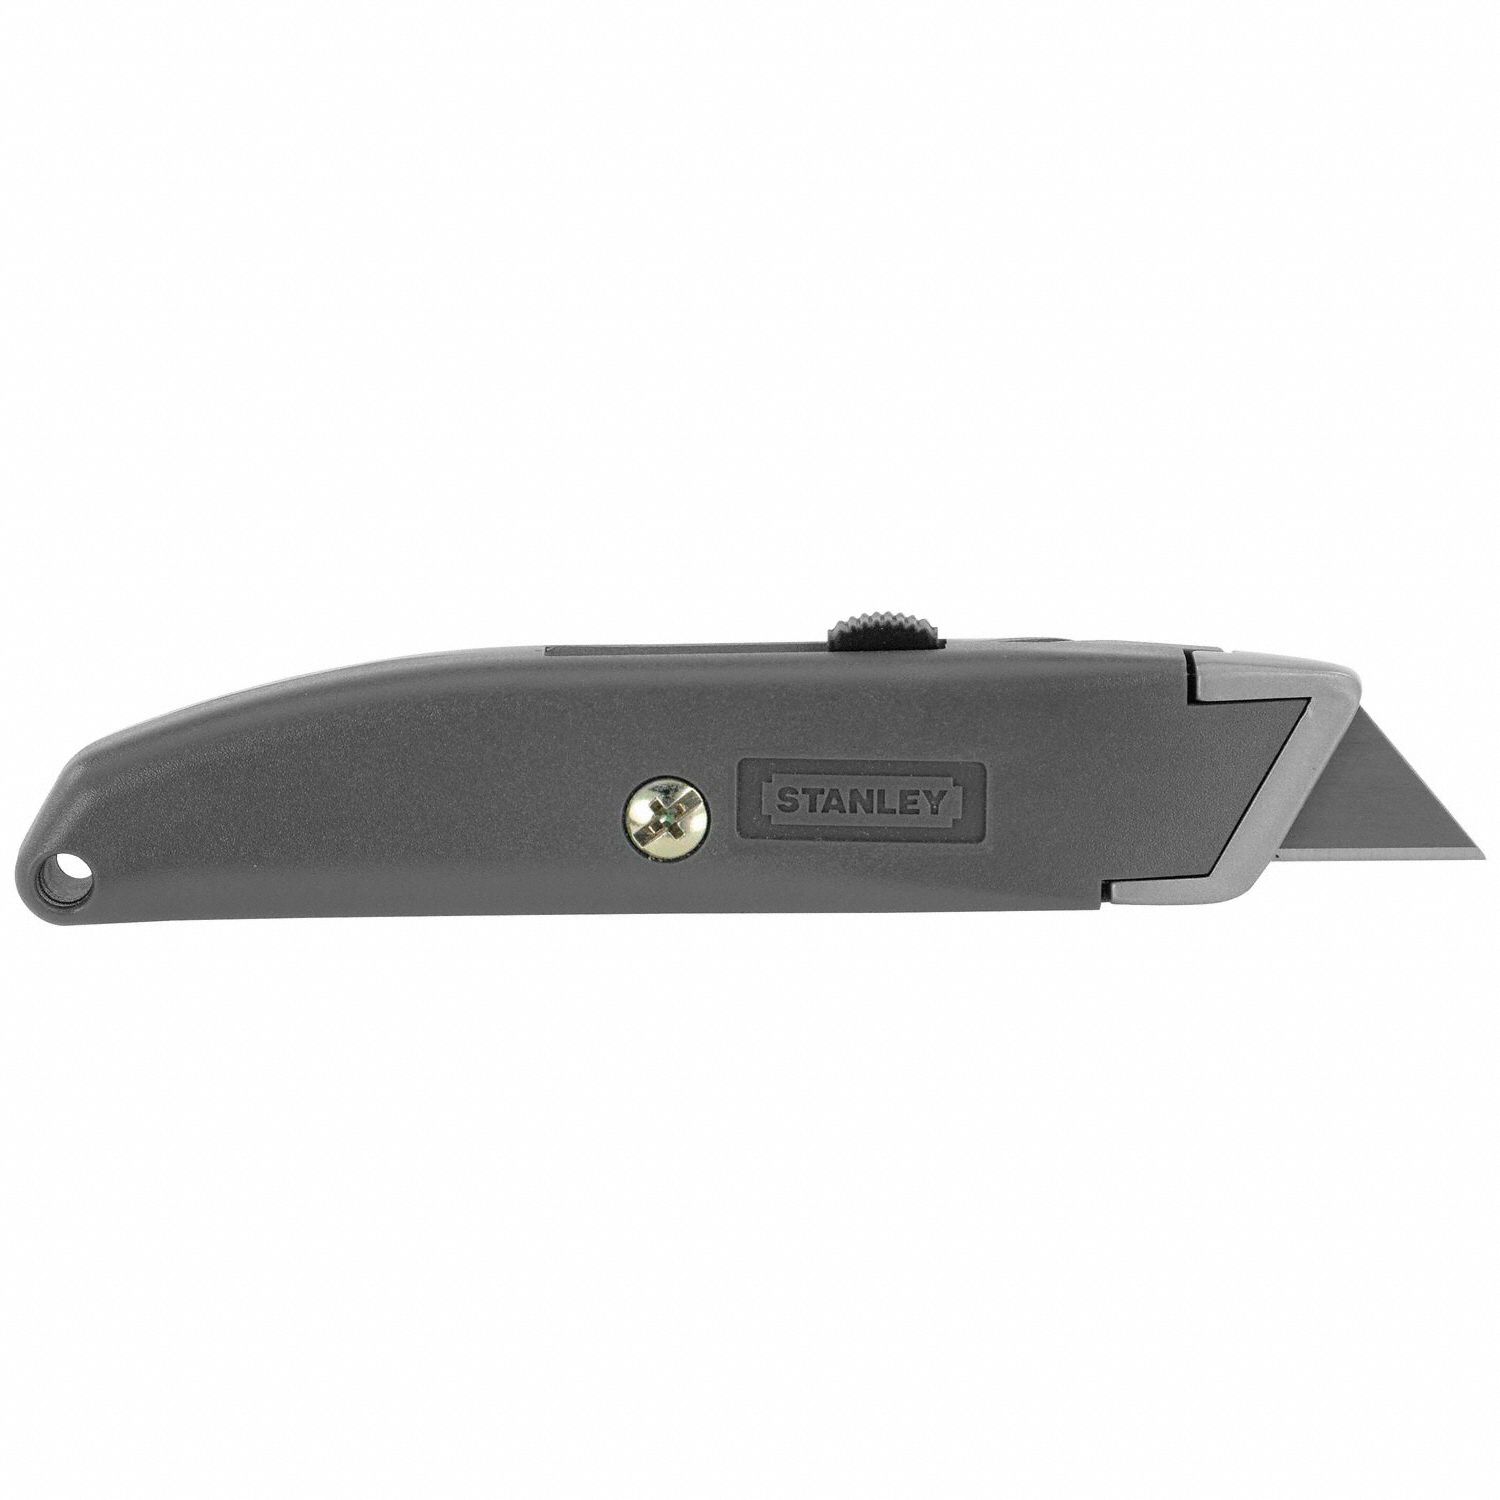 STANLEY, 6 in Overall Lg, Steel Std Tip, Utility Knife - 5C945